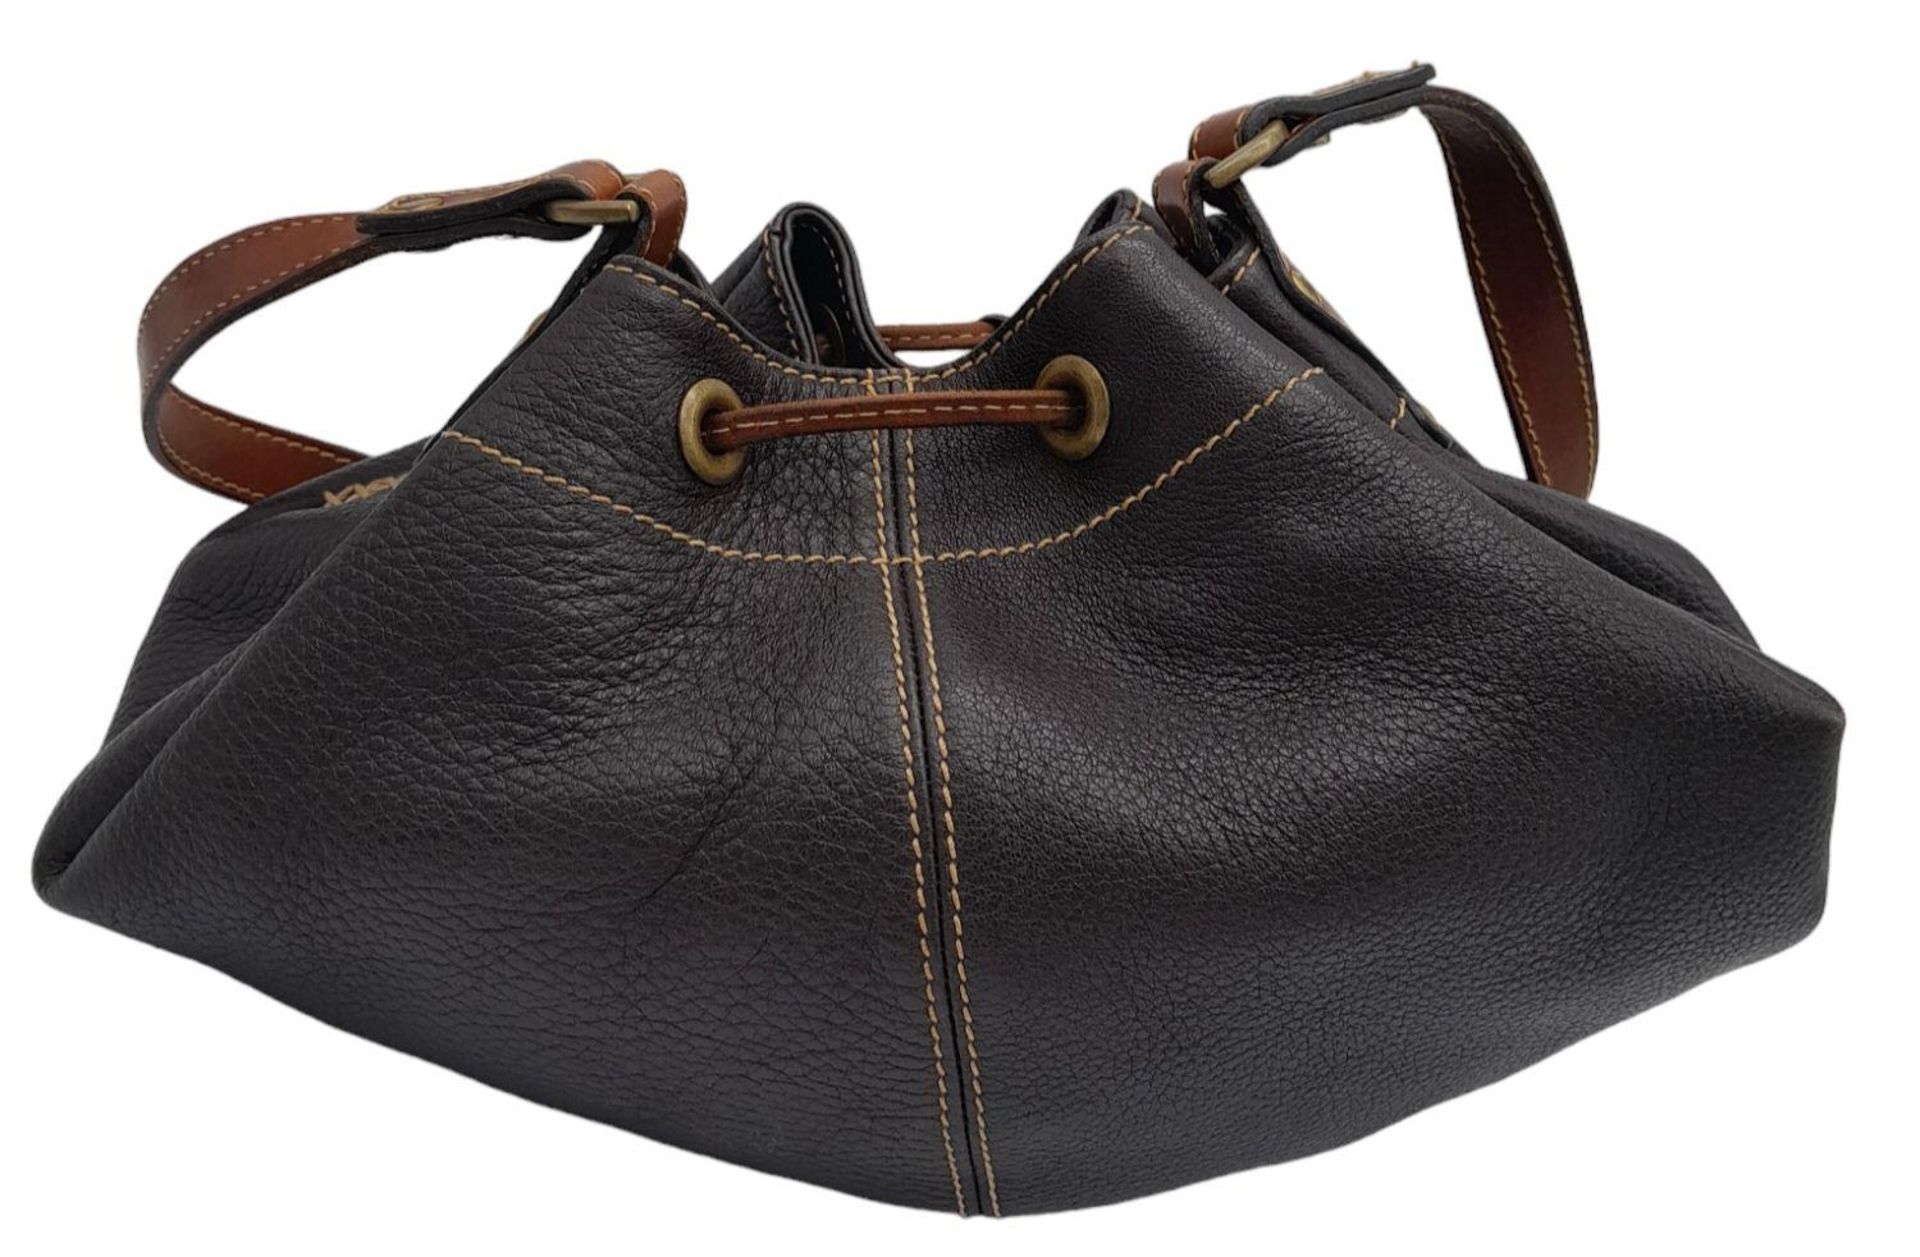 A Mulberry Brown Drawstring Bag. Leather exterior with gold-toned hardware, adjustable strap and - Bild 3 aus 9